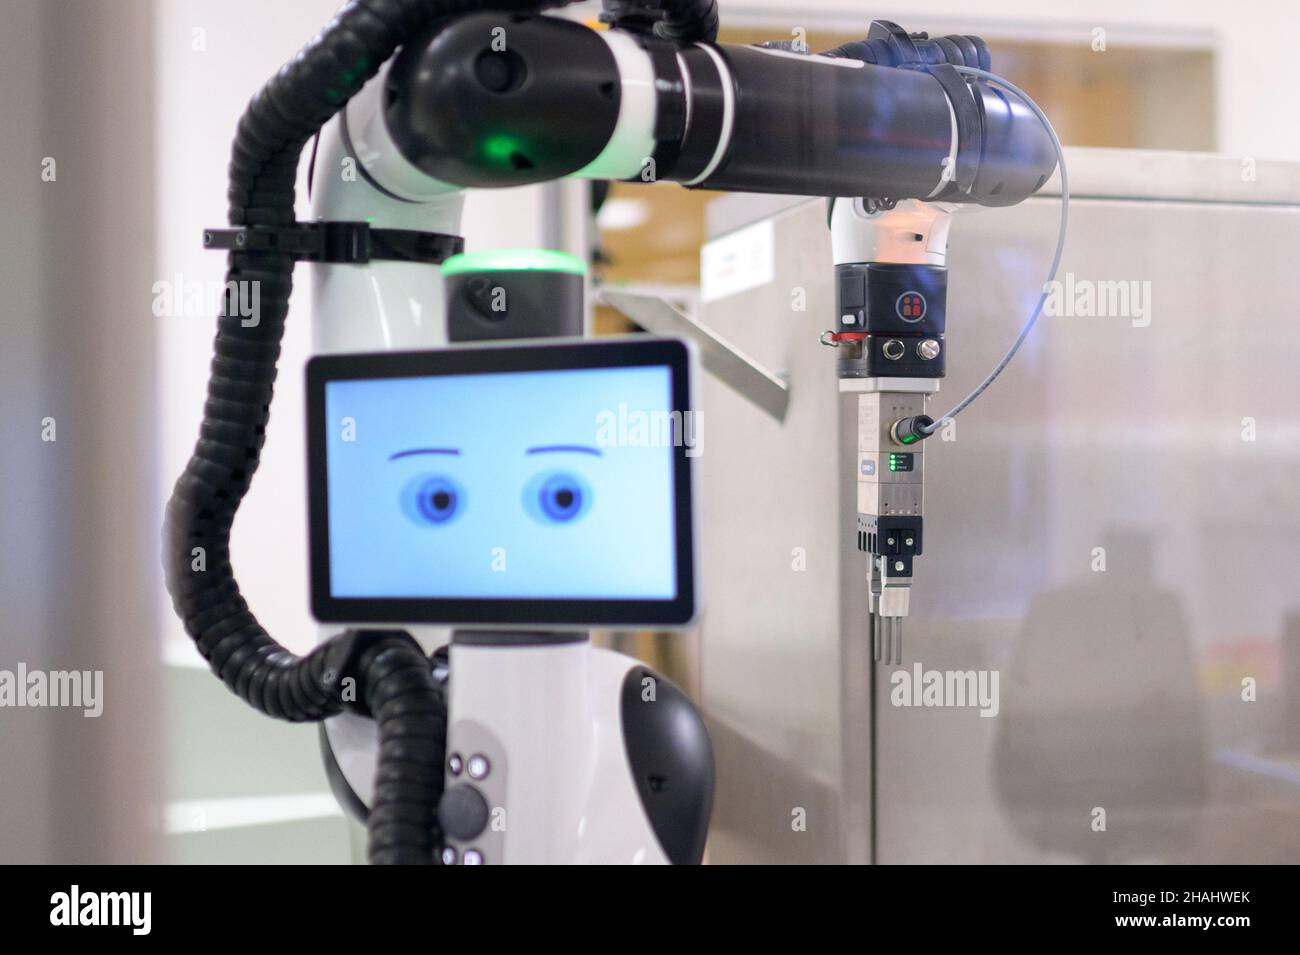 Bad Oldesloe, Germany. 13th Dec, 2021. A robot stands by in the laboratory.  The Asklepios Clinic in Bad Oldesloe has unveiled an autonomous laboratory  system that does almost without human employees. Instead